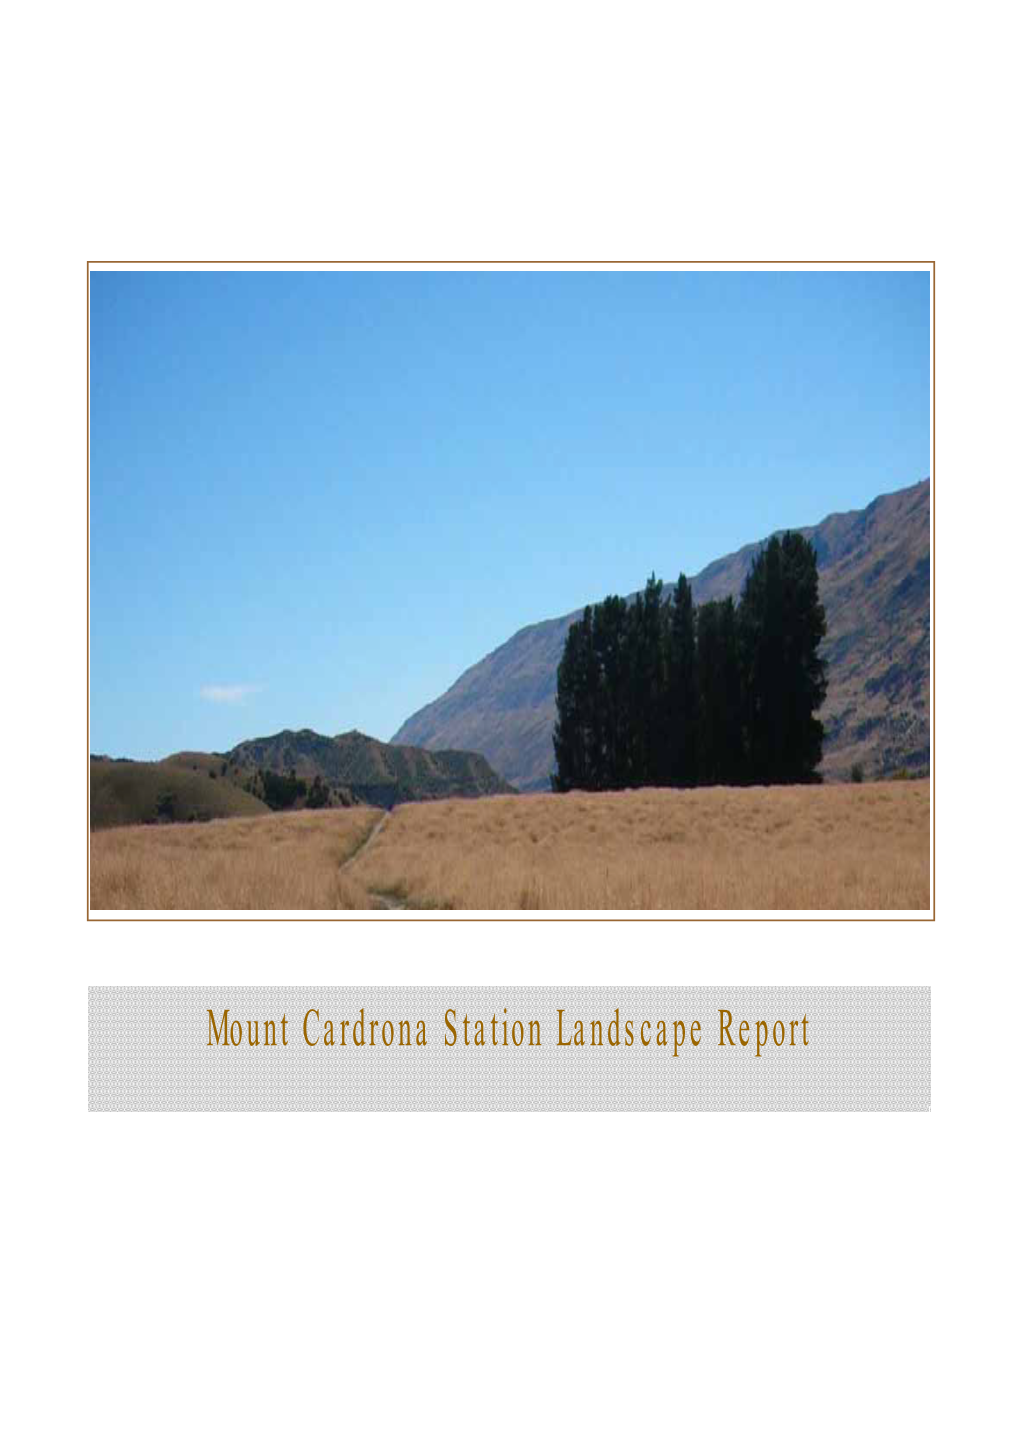 Mount Cardrona Station Landscape Report CONTENTS EXECUTIVE SUMMARY